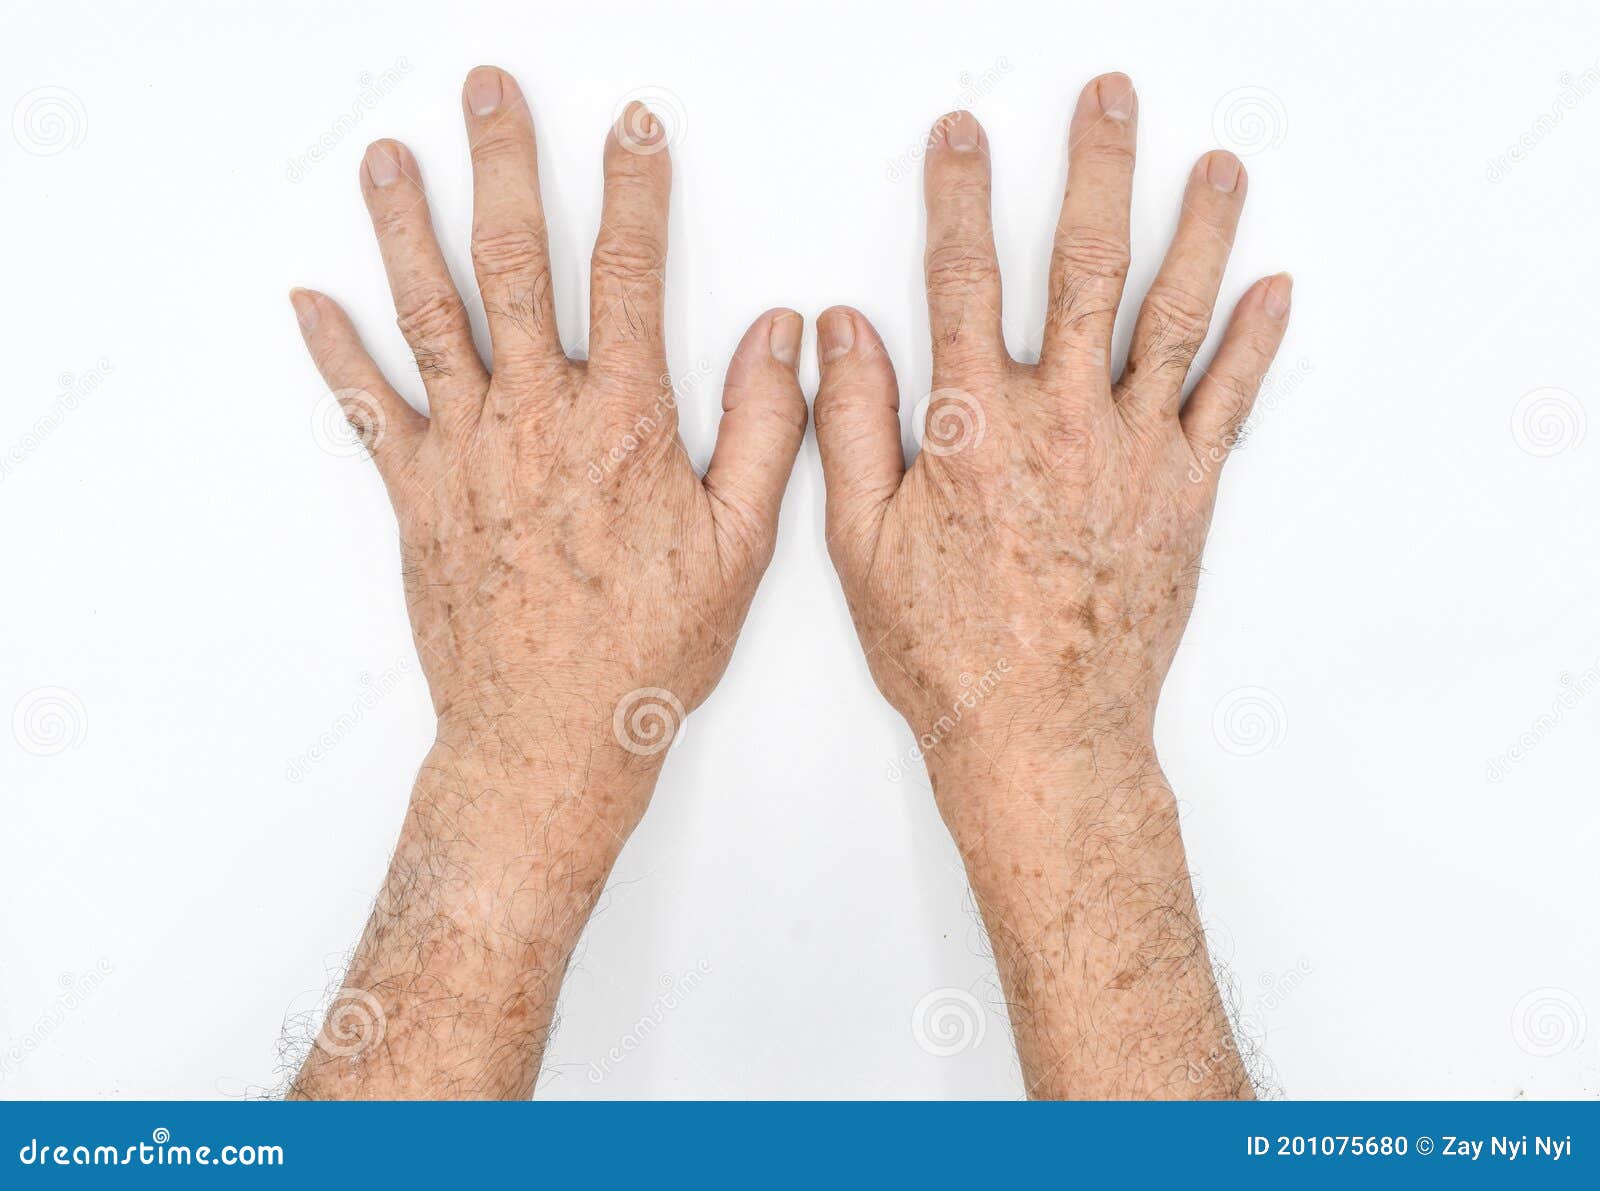 age spots on hands of asian elder man. they are brown, gray, or black spots and also called liver spots, senile lentigo, solar